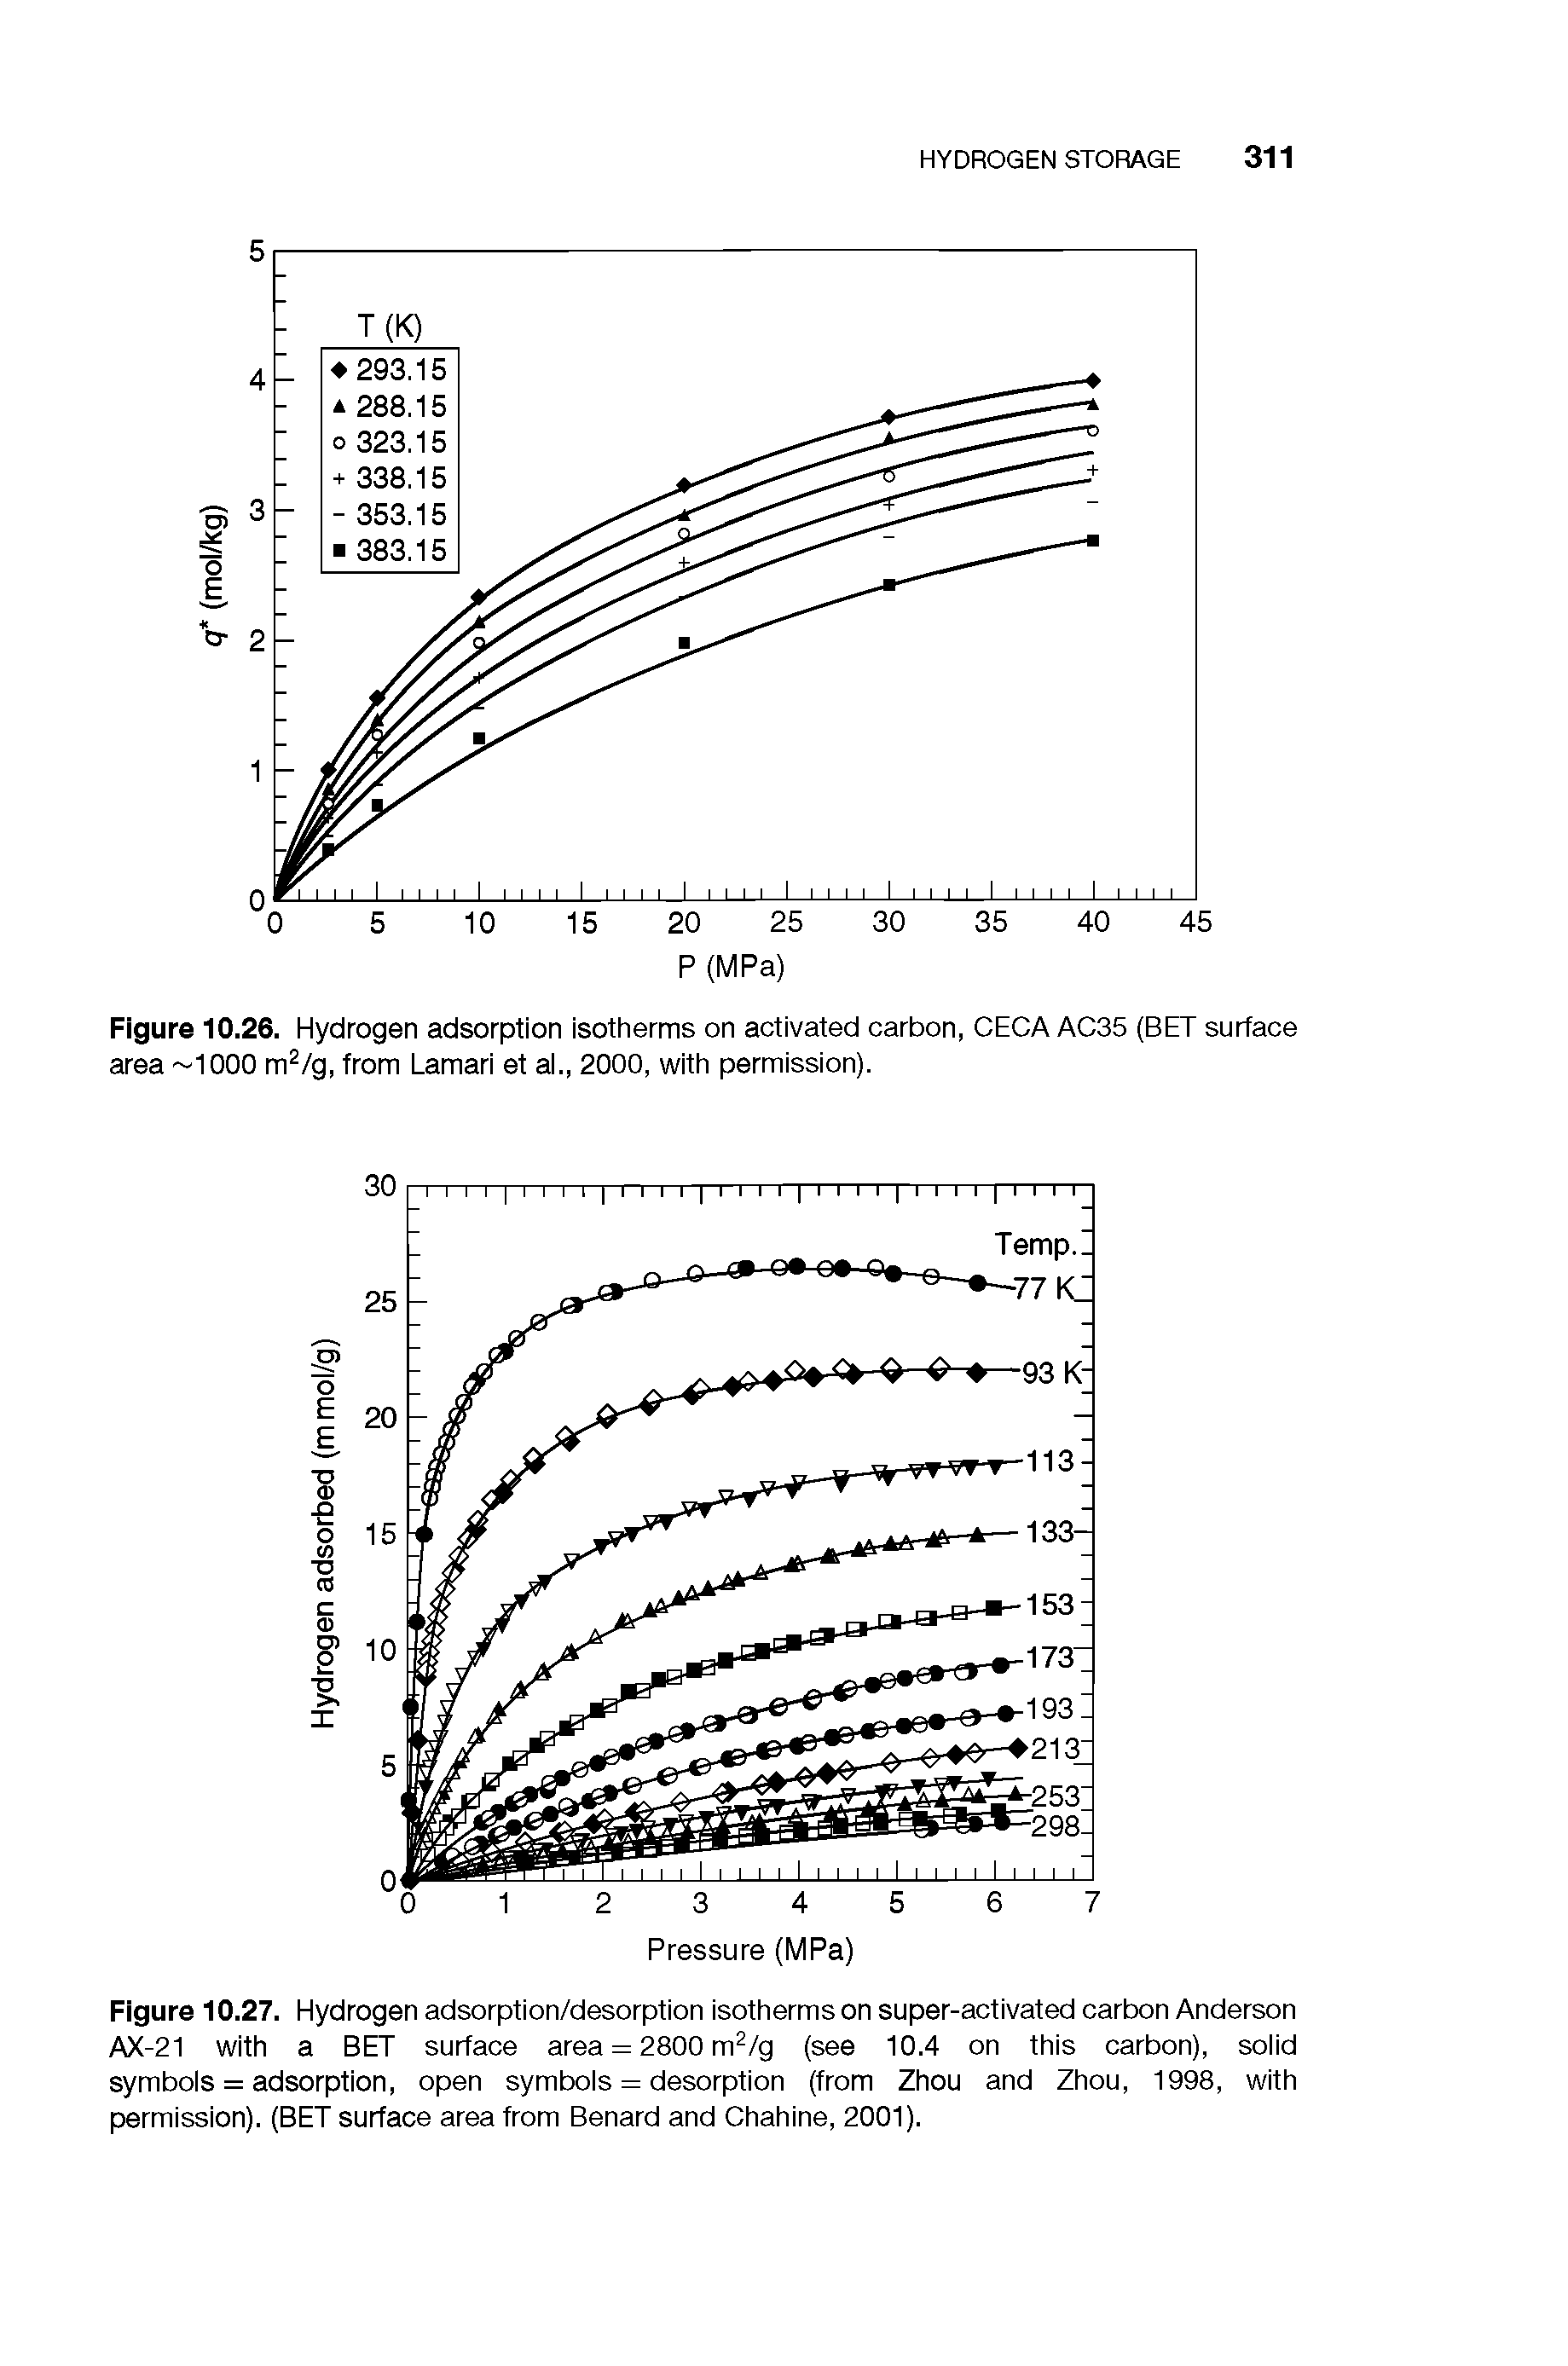 Figure 10.27. Hydrogen adsorption/desorption isotherms on super-activated carbon Anderson AX-21 with a BET surface area = 2800 m /g (see 10.4 on this carbon), soiid symbois = adsorption, open symbois = desorption (from Zhou and Zhou, 1998, with permission). (BET surface area from Benard and Chahine, 2001).